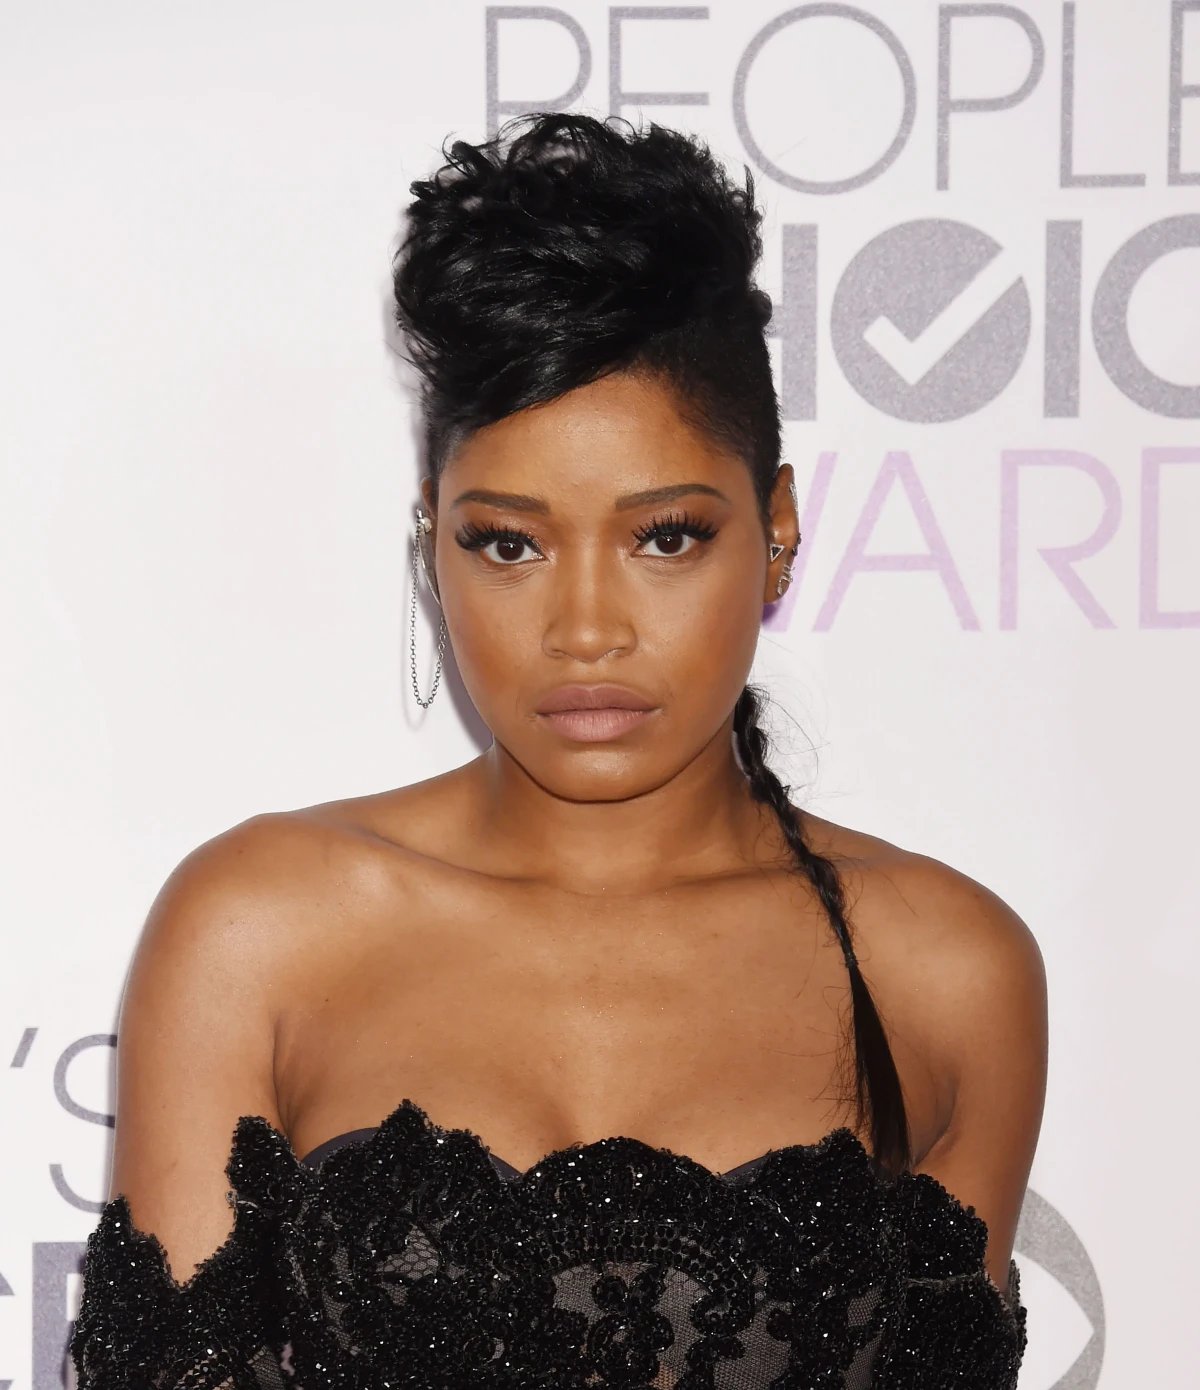 pompadour hairstyles for women keke palmer with pompadour